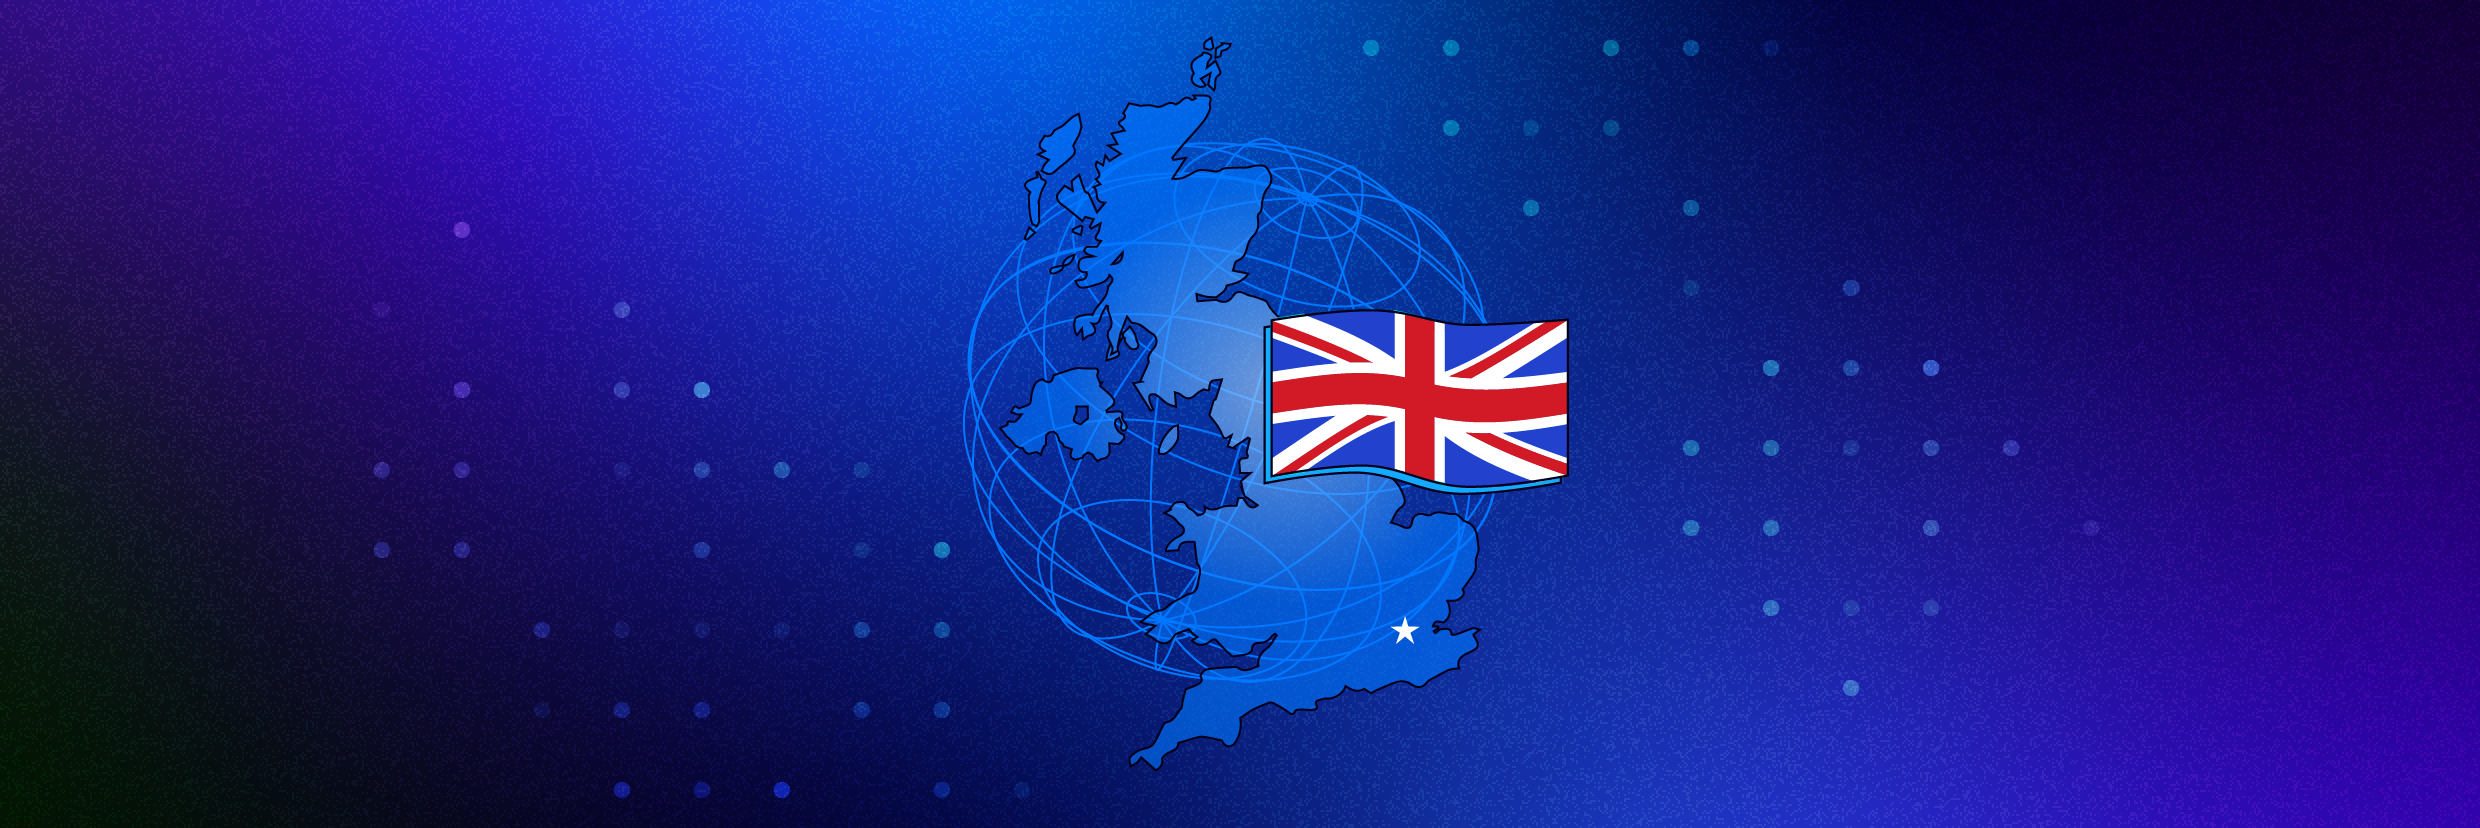 Illustration of a globe centered on the UK featuring the British flag.